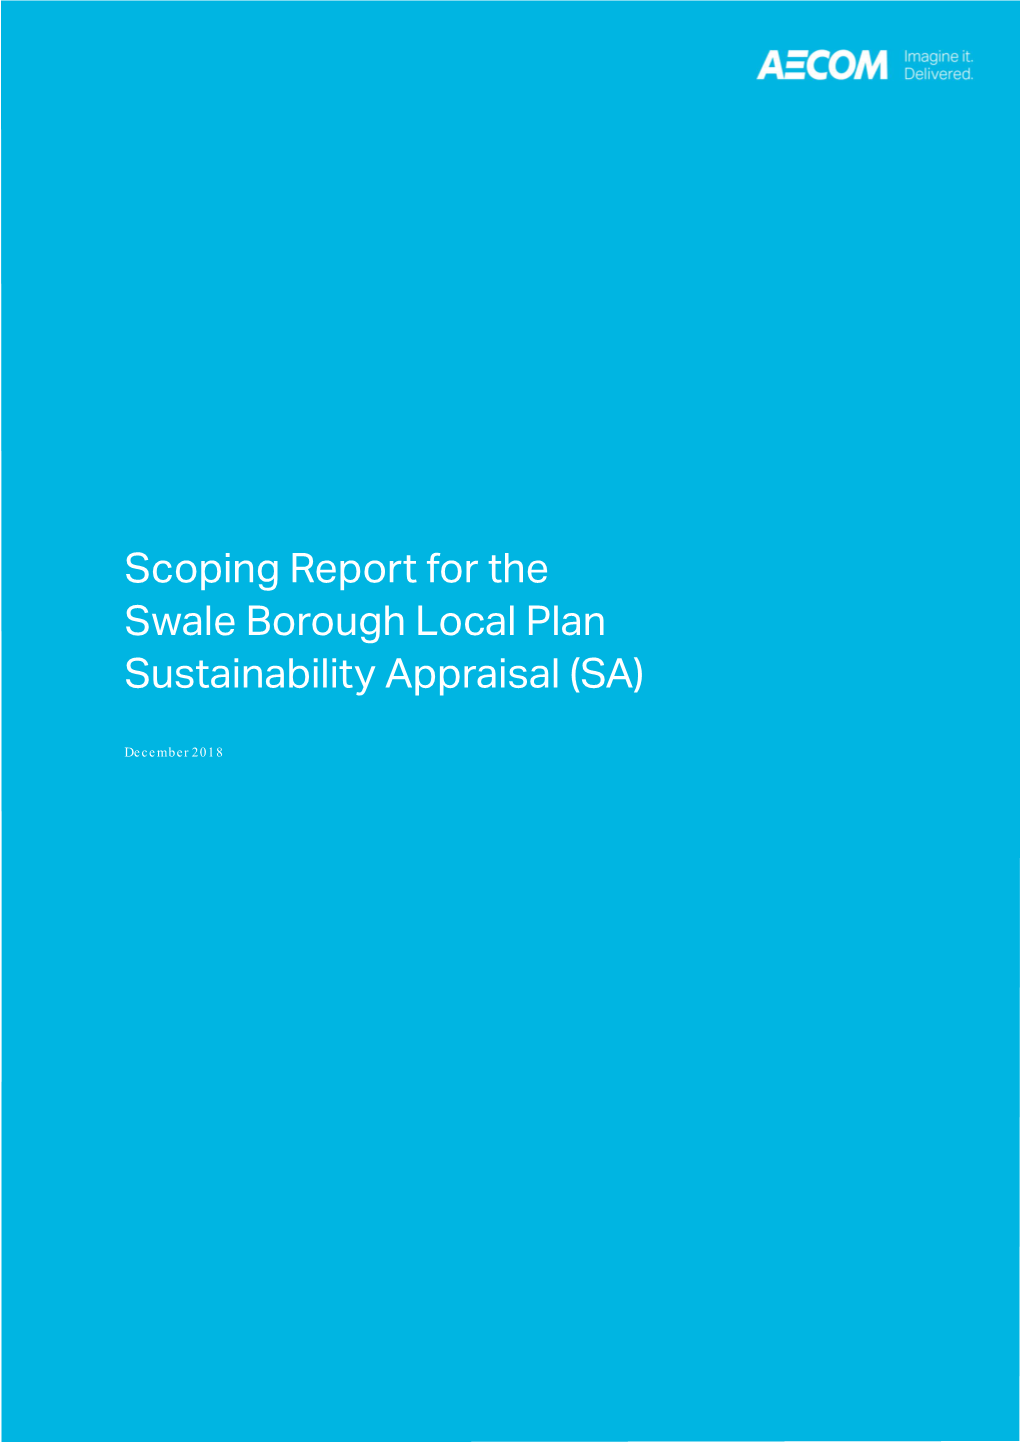 Chris Mcnulty Report Sustainability Appraisal for the Swale Borough Local Plan 2018-05-31